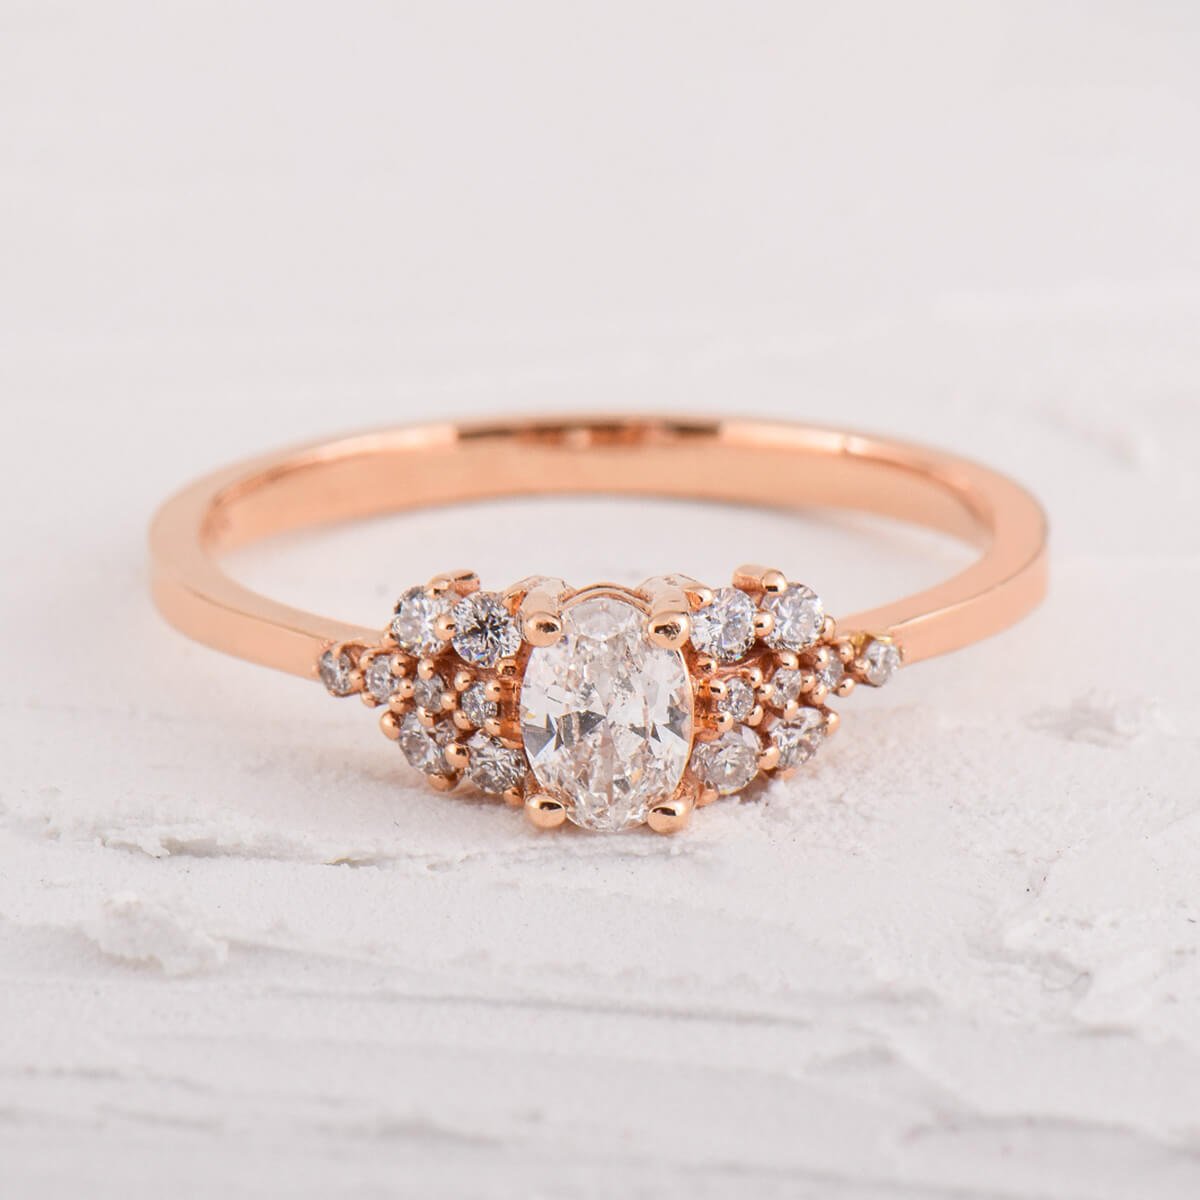 Auva Oval Solitaire Diamond Ring